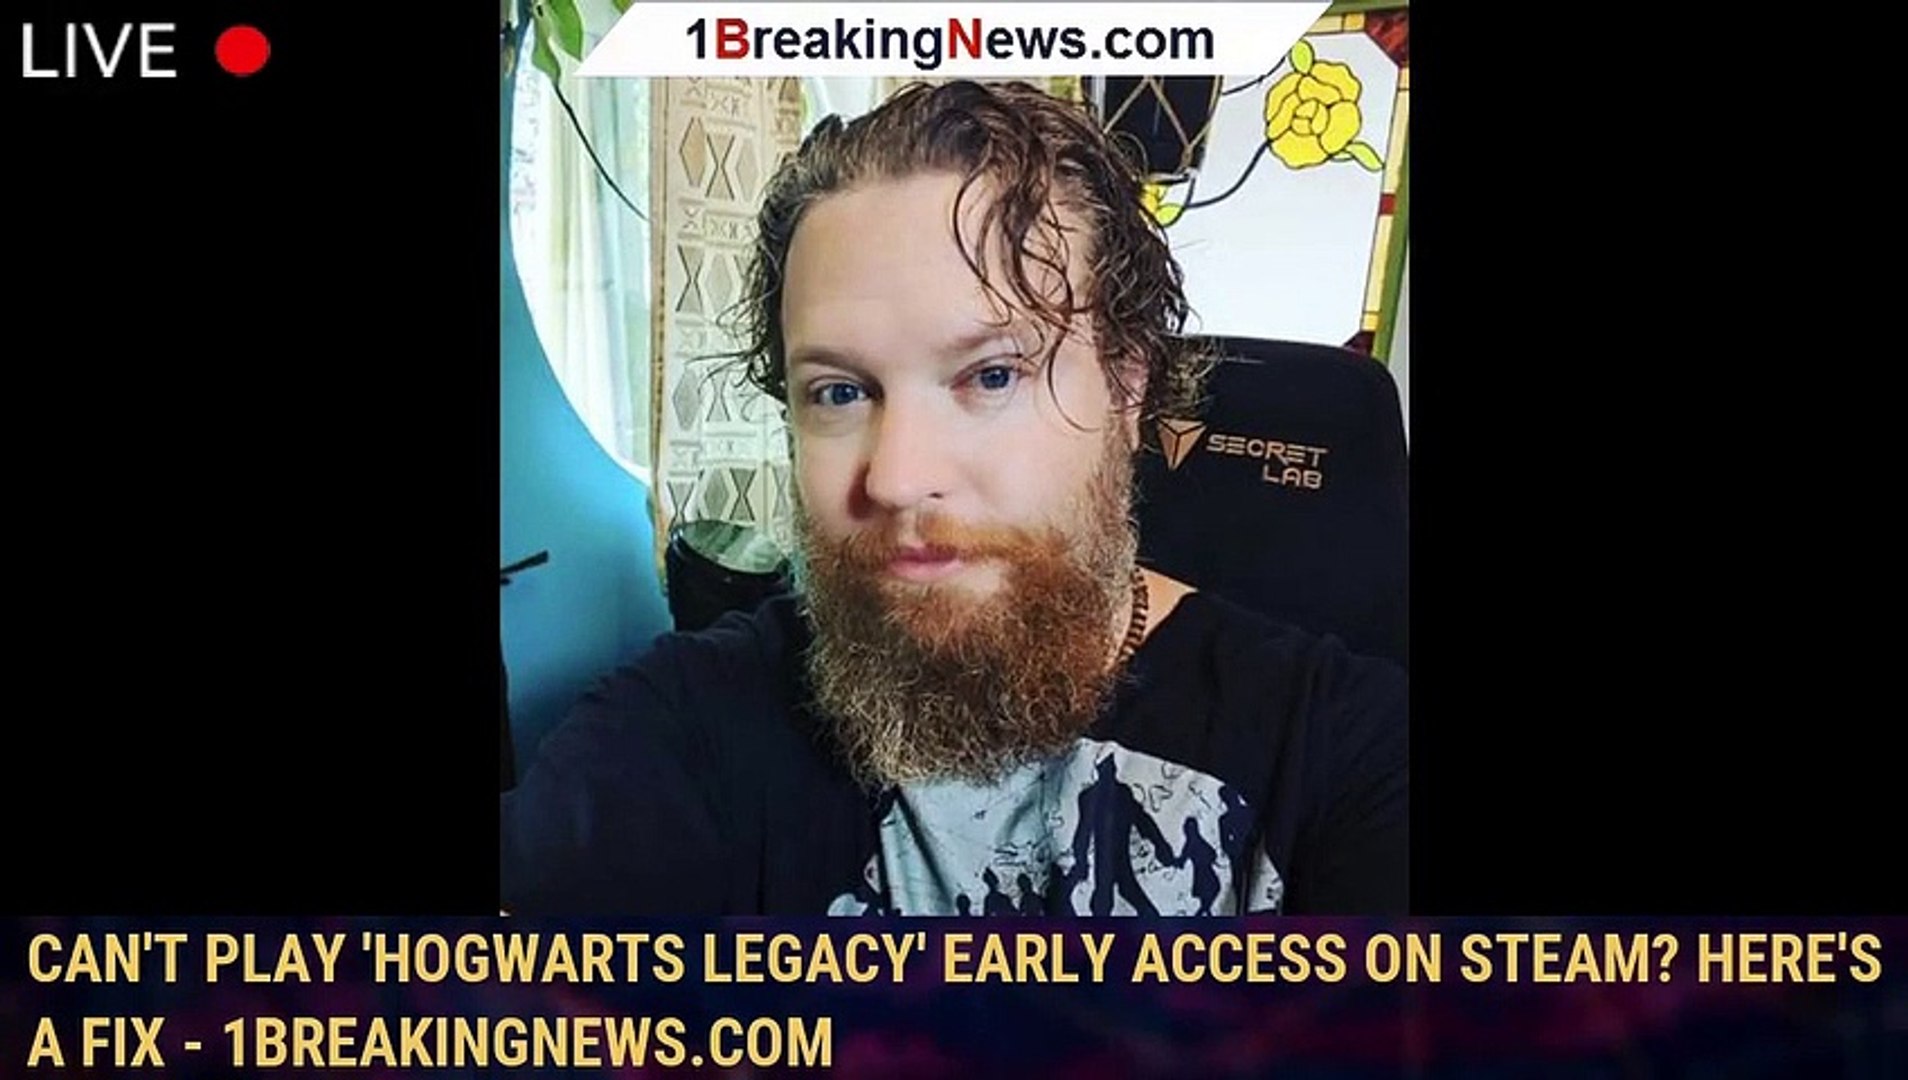 How to Play Hogwarts Legacy Early